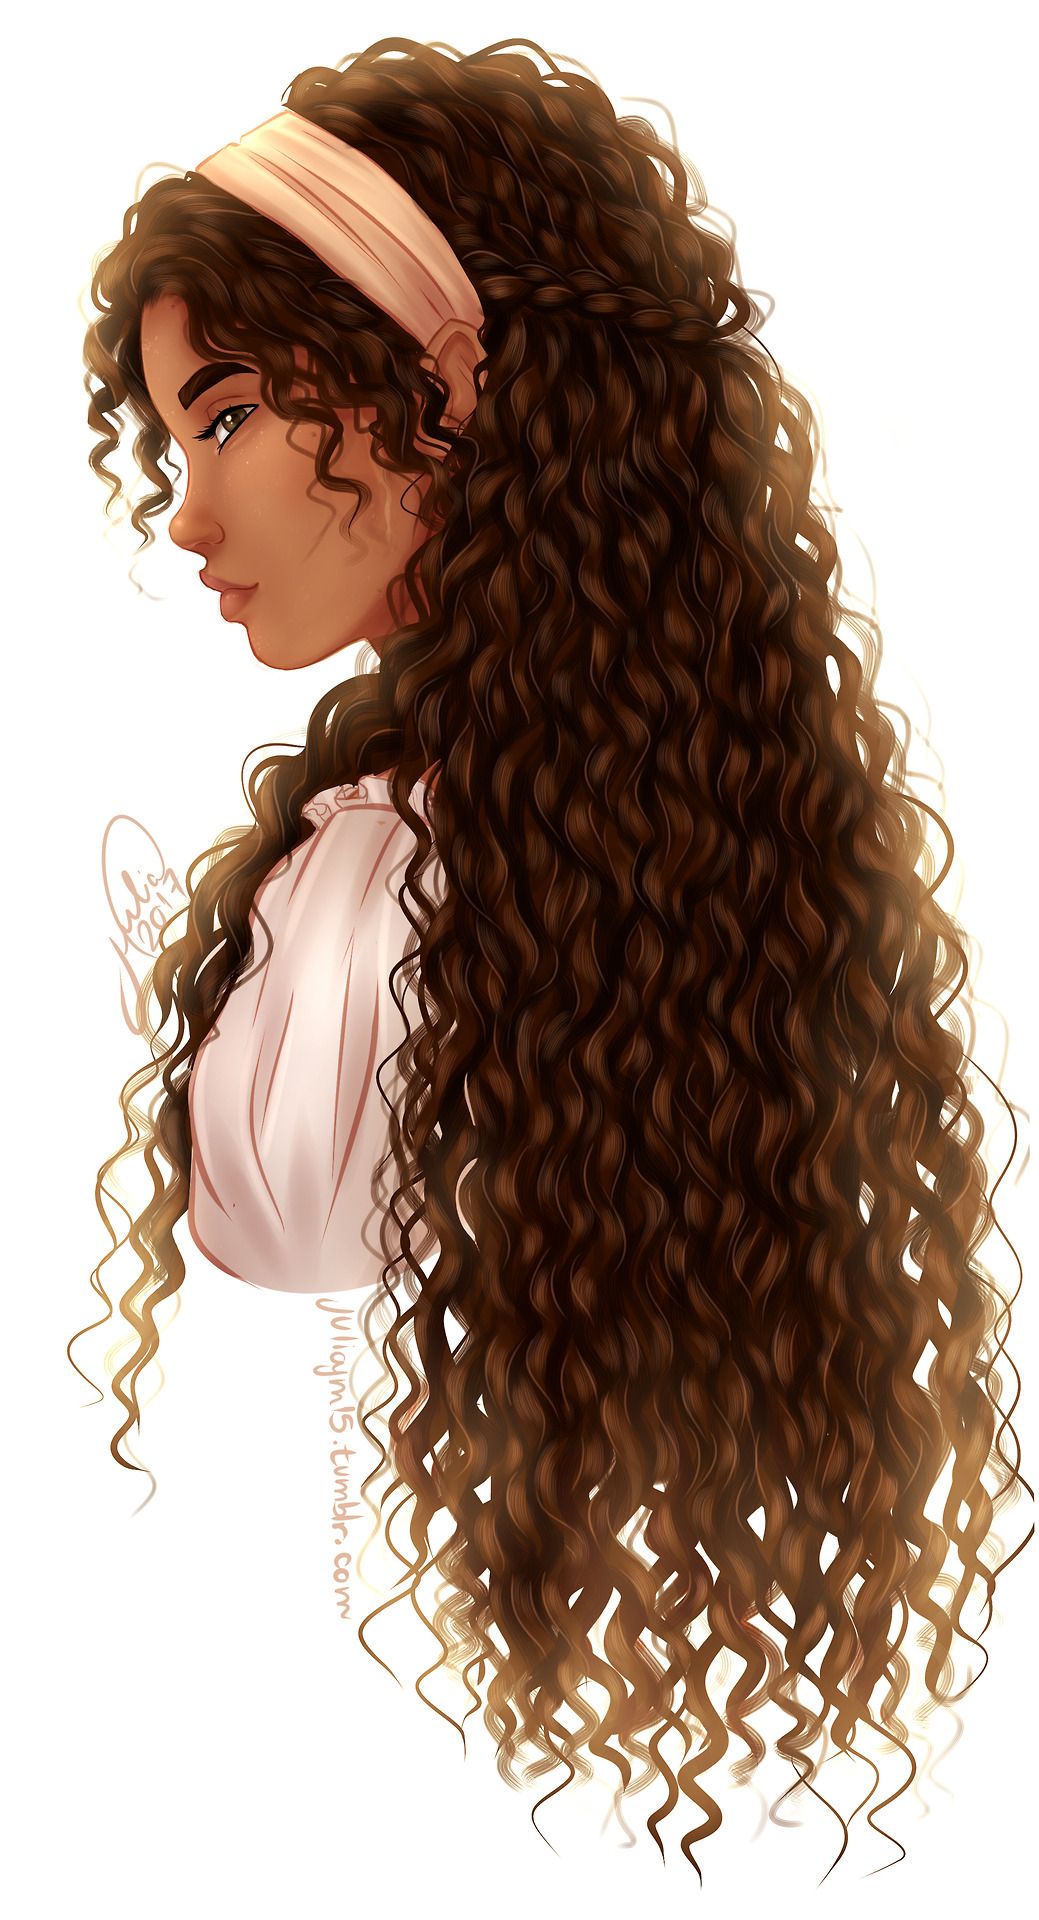 Anime Girl With Curly Brown Hair 